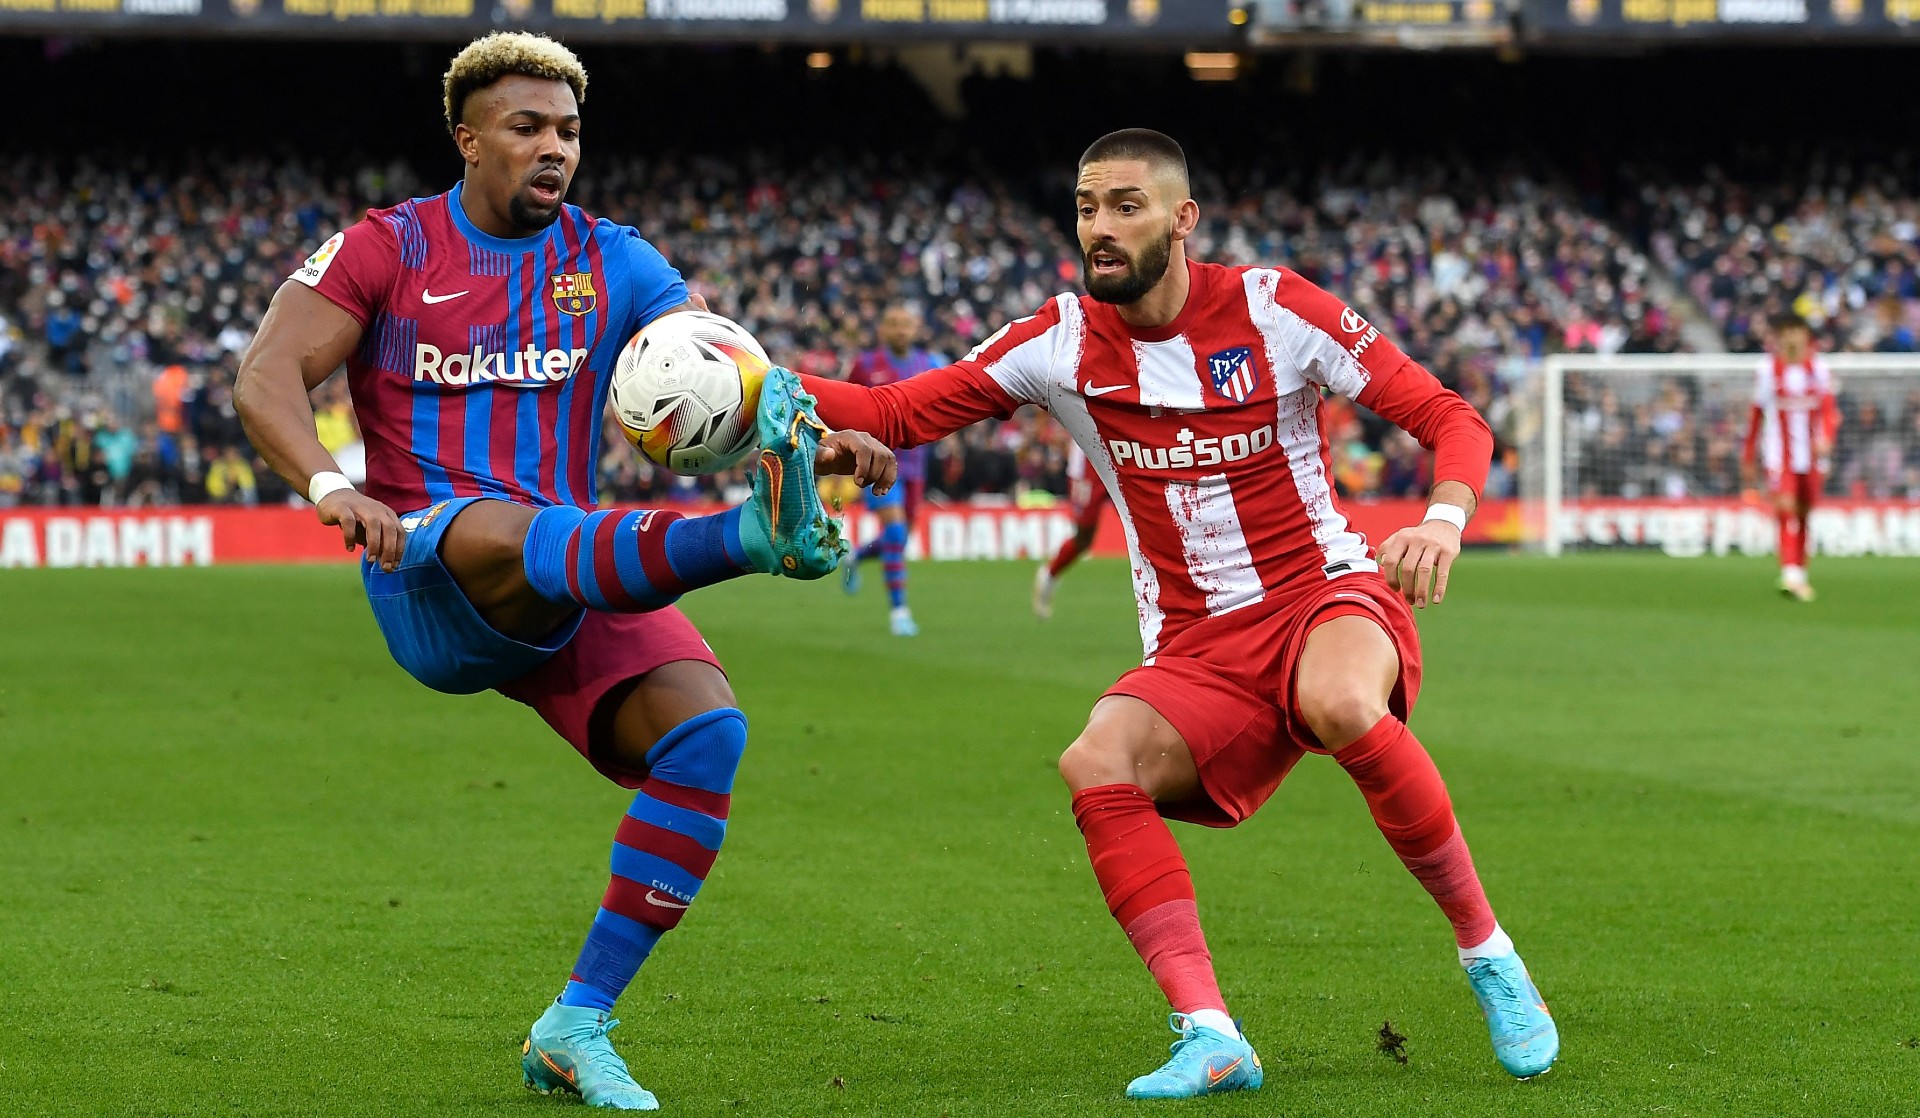 Barcelona fans look forward to Traore in the Catalan derby